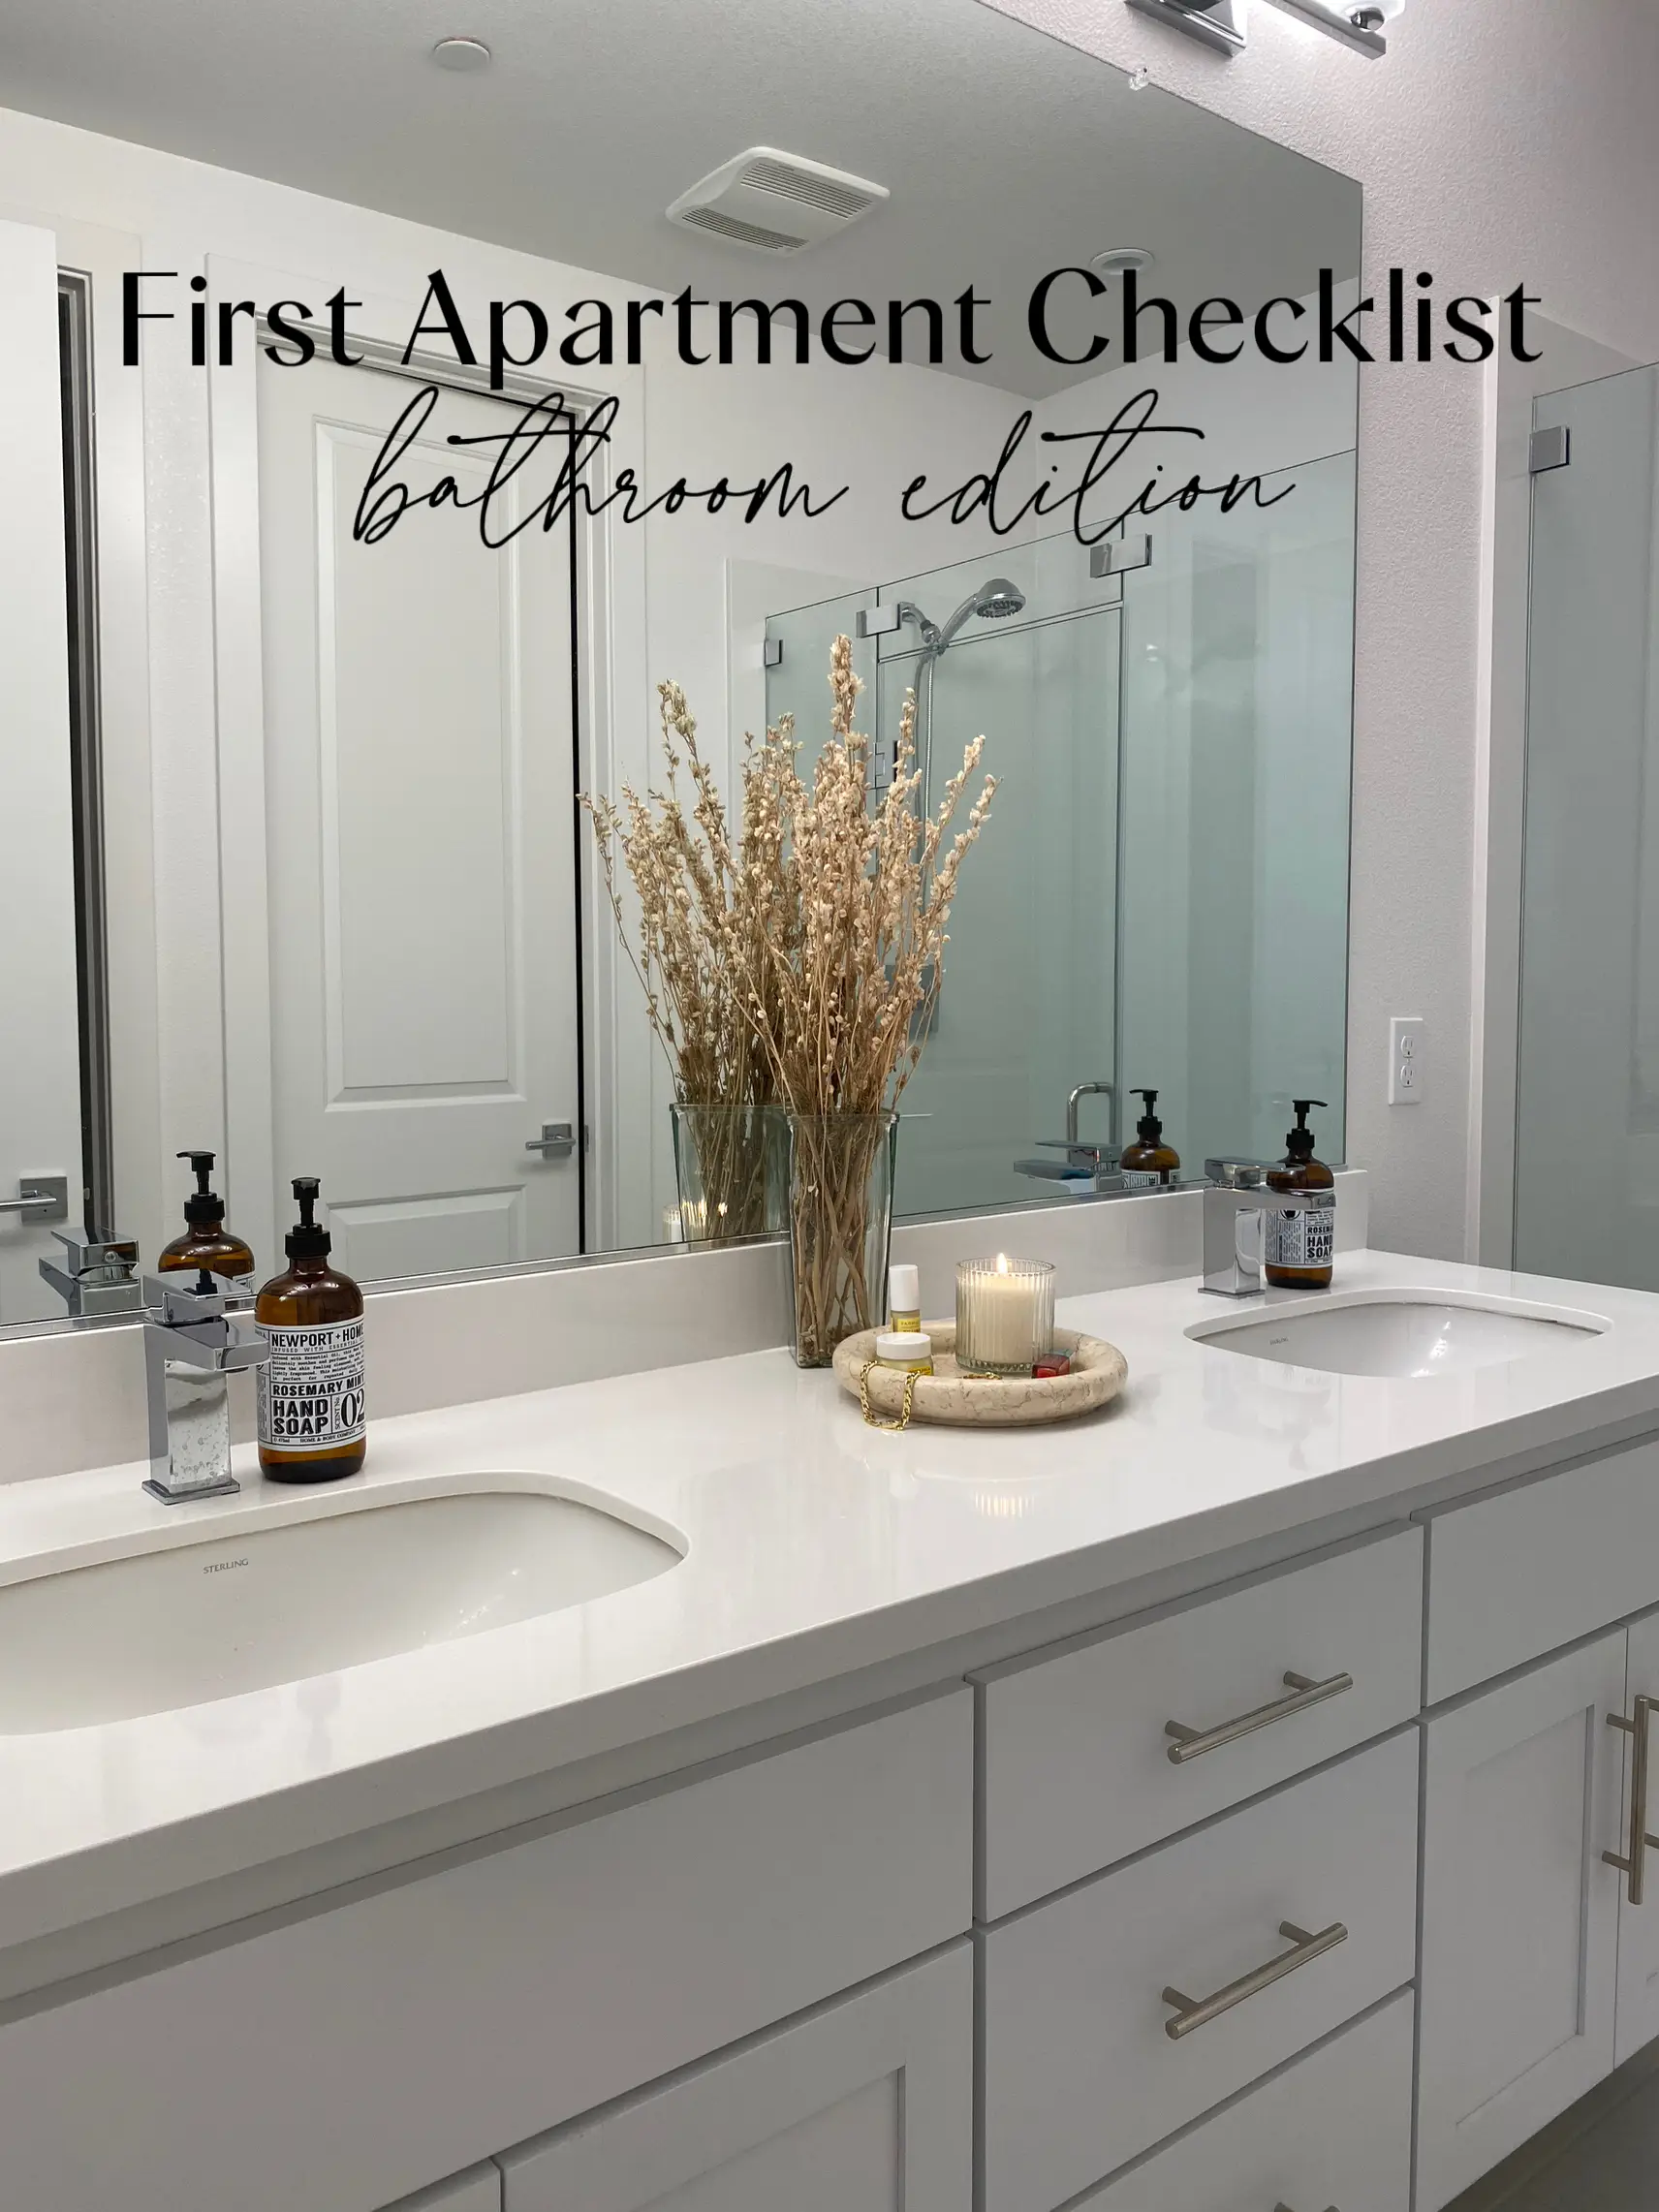 6/14) First Apartment Checklist: Appliances, Gallery posted by Carissa  Nicole